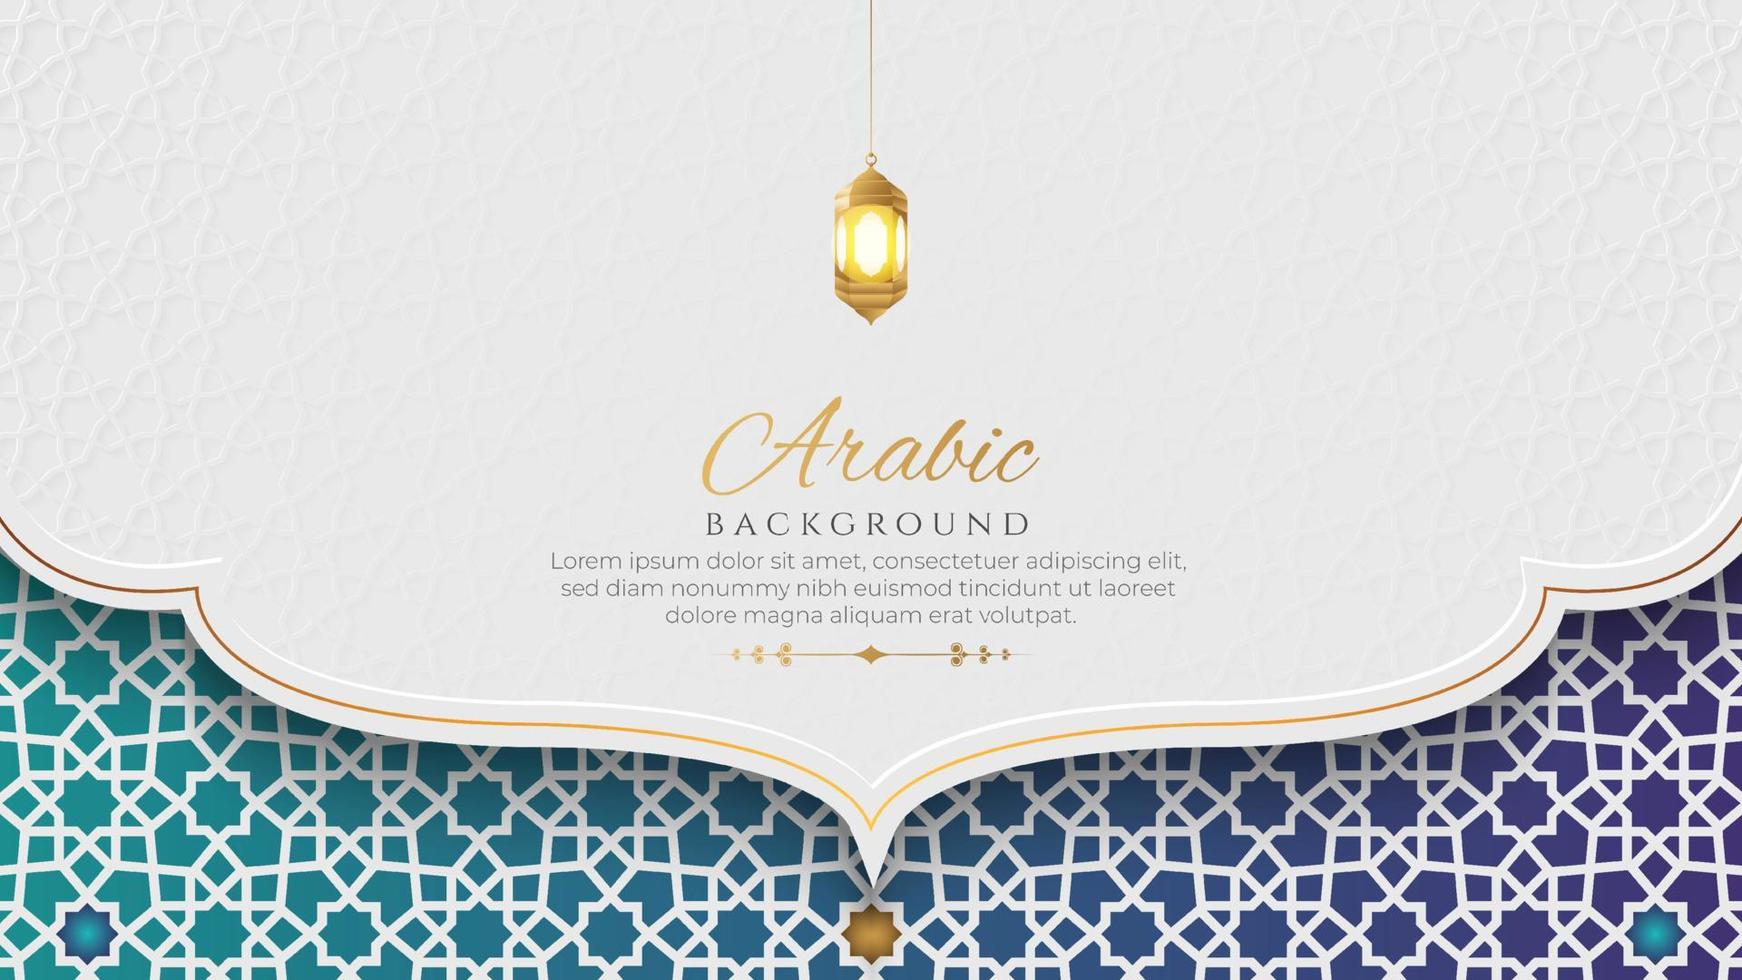 White and Blue Luxury Islamic Arch Background with Decorative Ornament Pattern vector